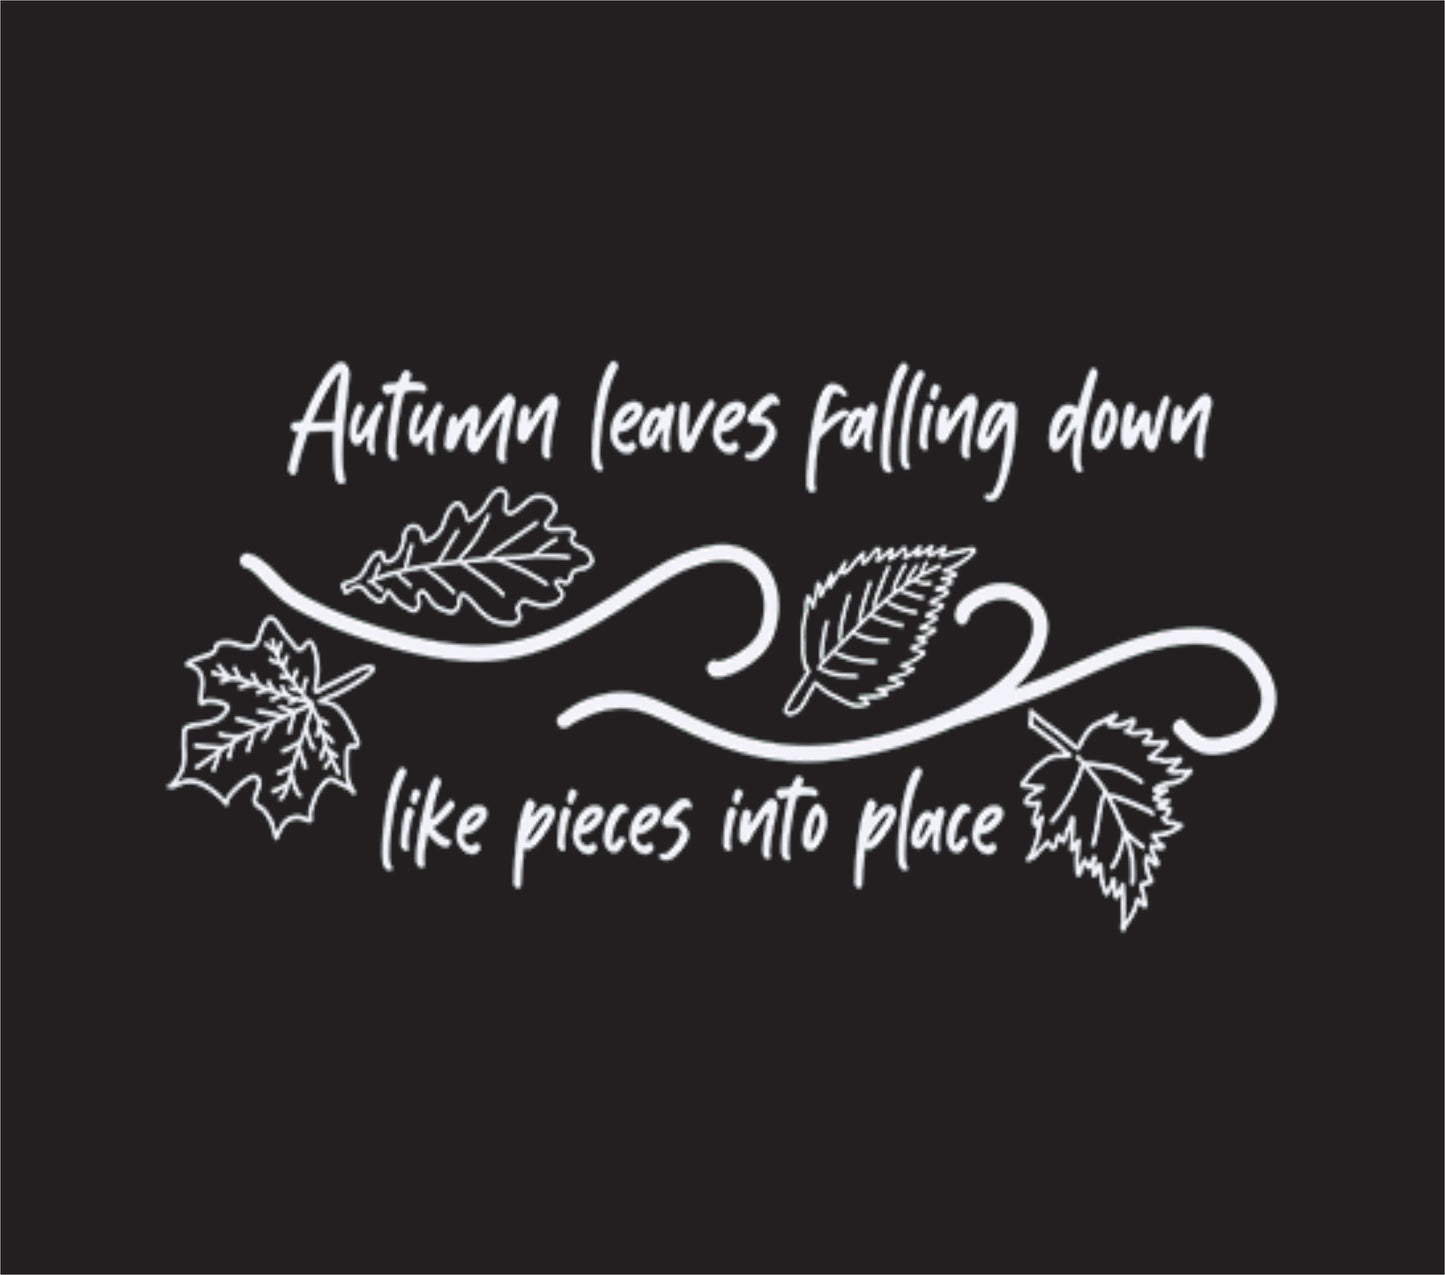 "Taylor Swift Autumn Leaves" Transfer